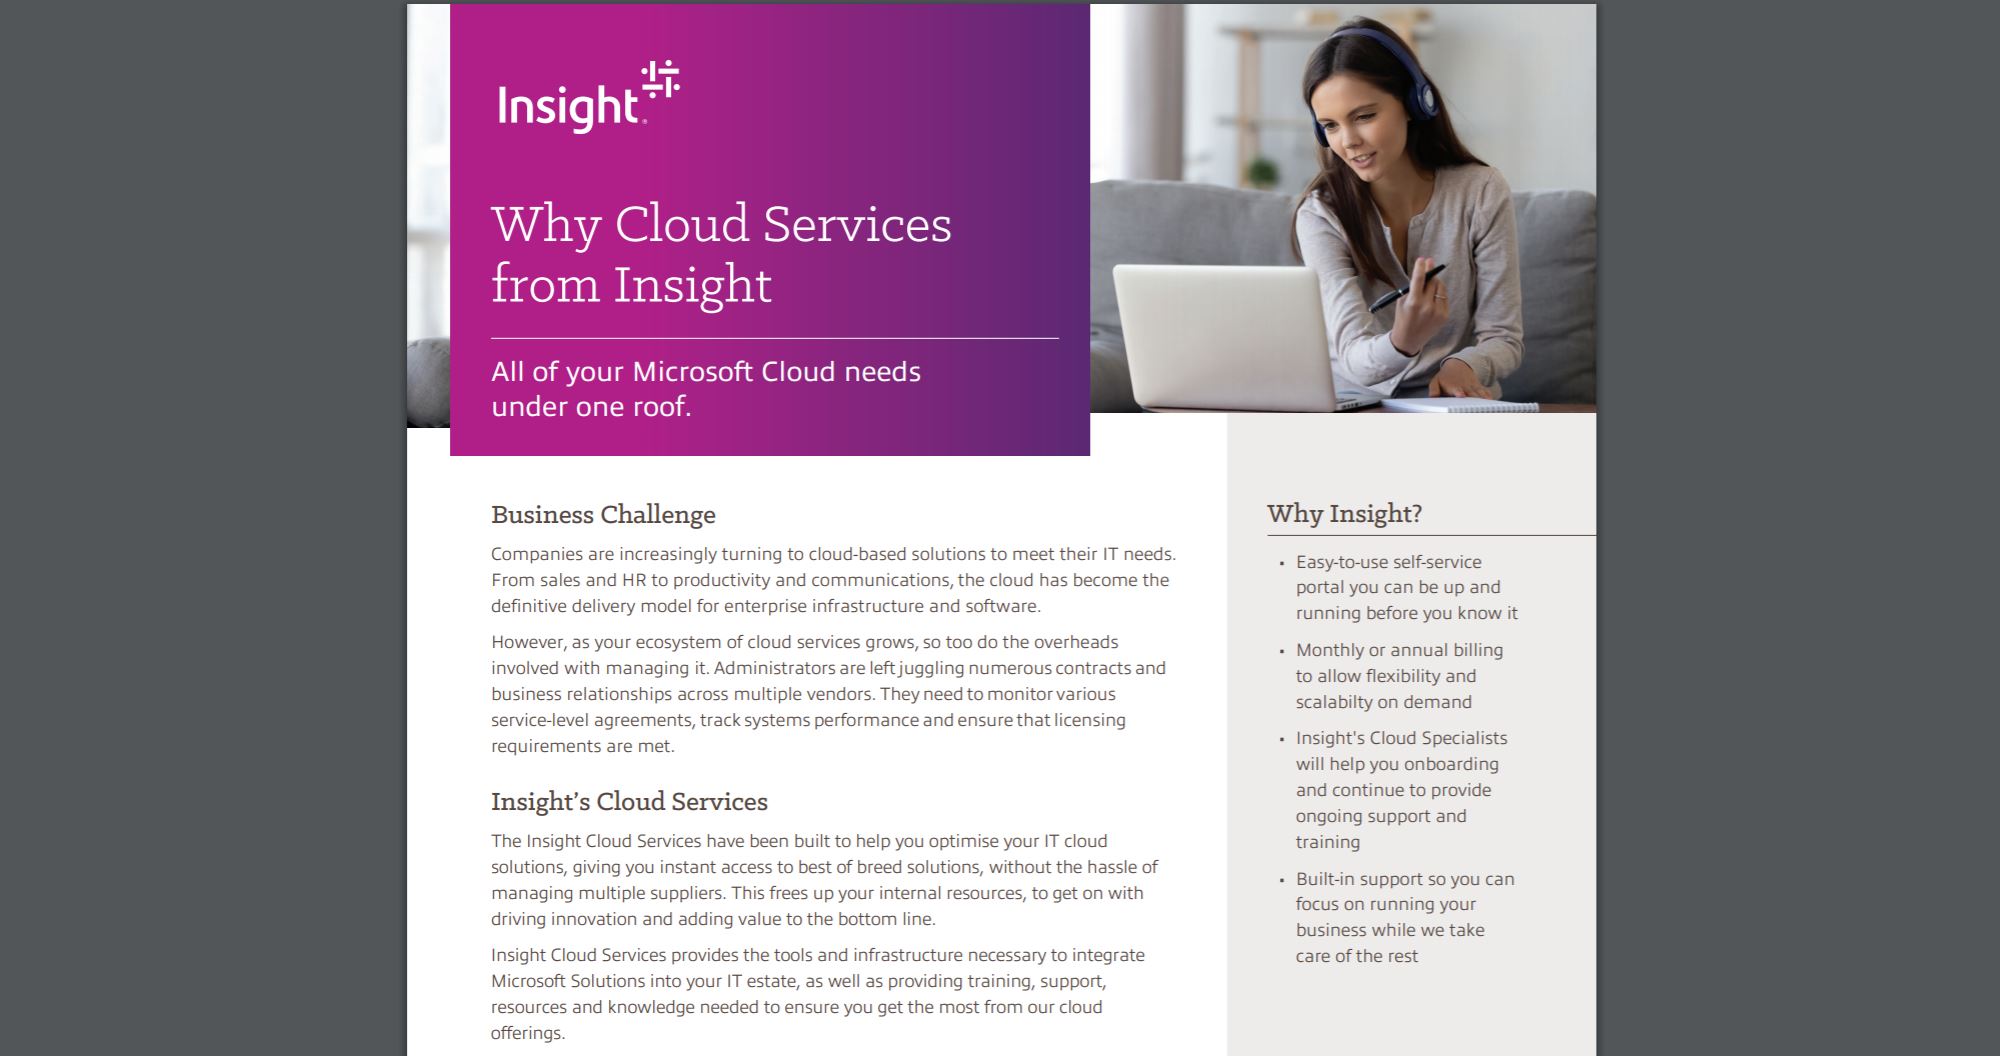 Article Why Cloud Services from Insight Image